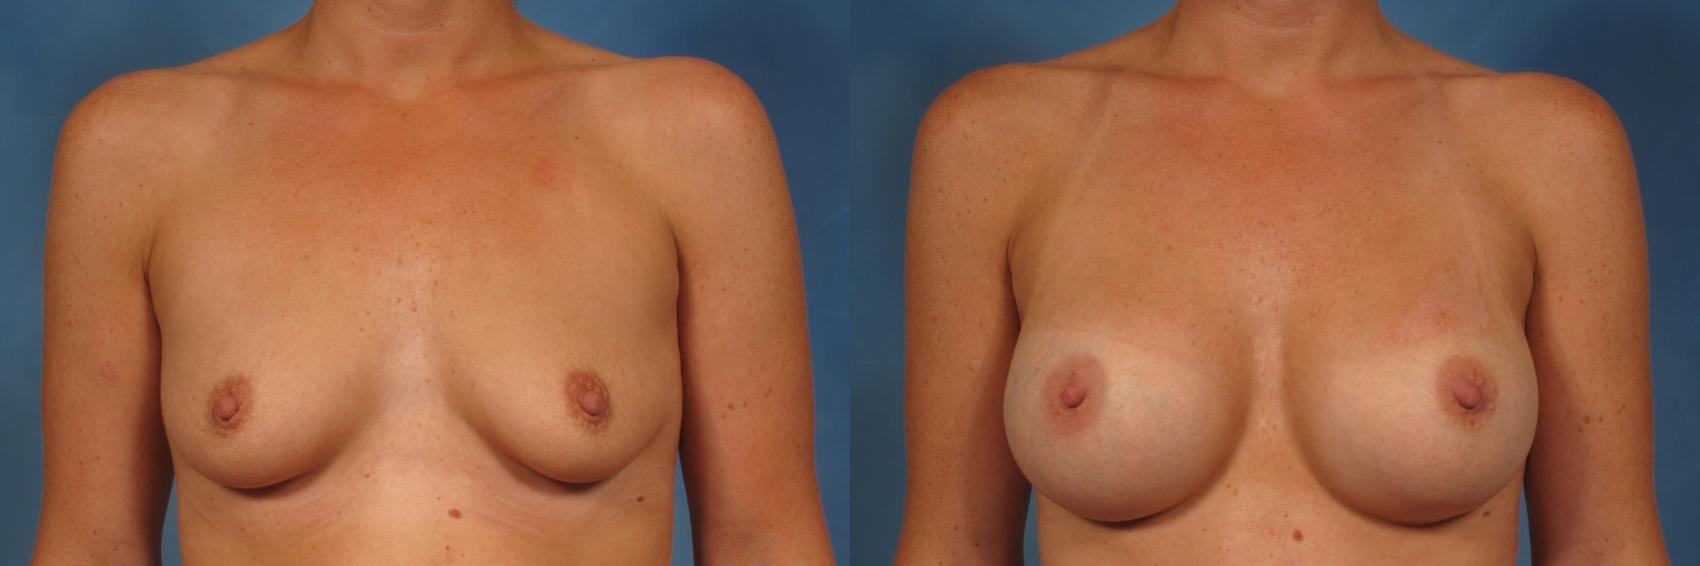 Front view of Silicone Breast Augmentation by Dr. Kent Hasen in 46 year old woman, Before